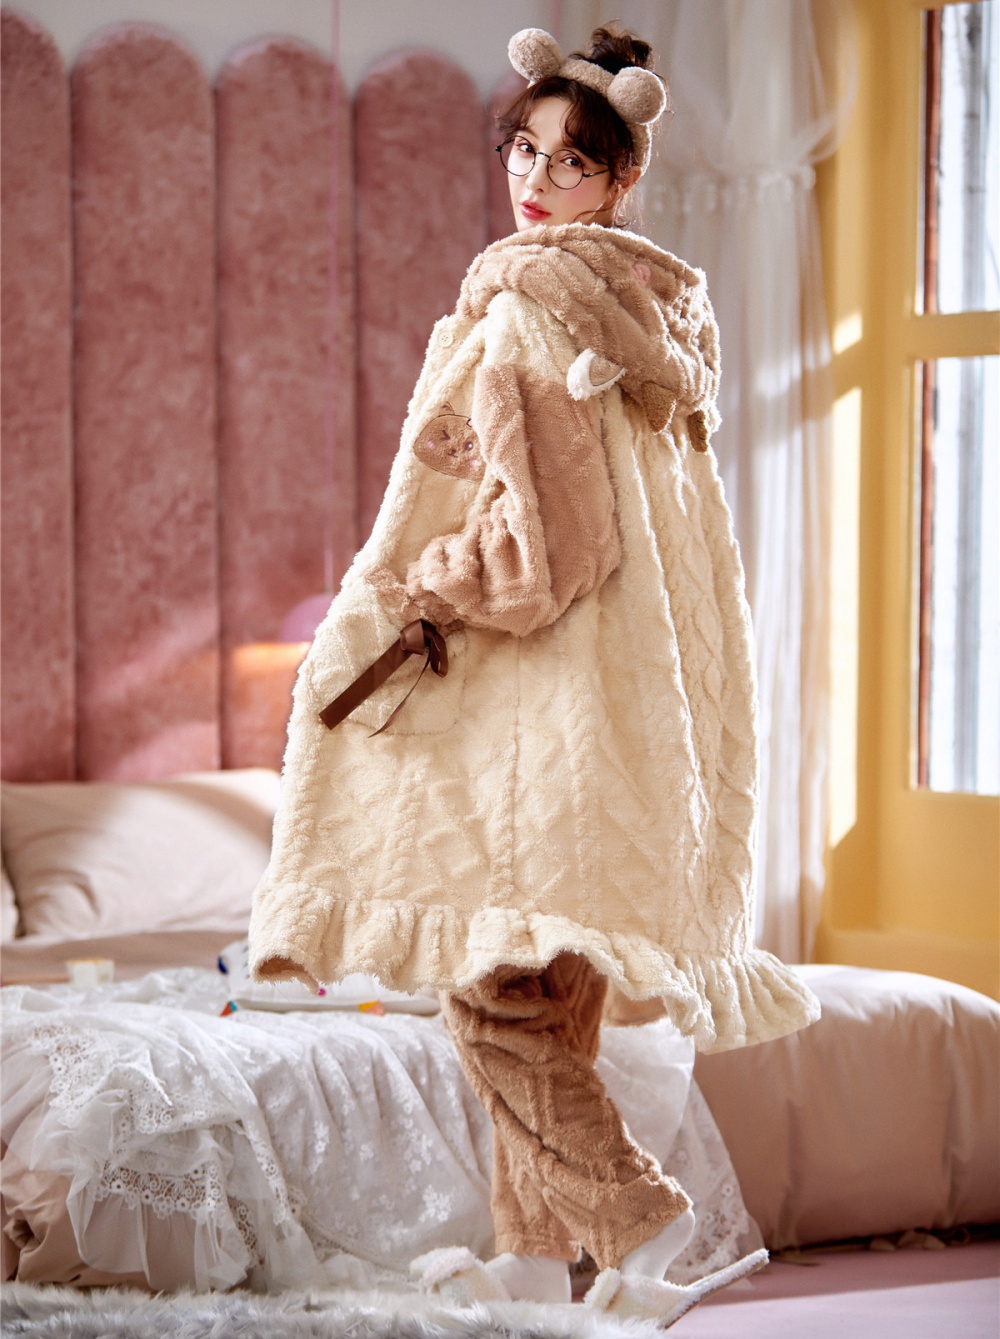 Winter long pajamas thick nightgown a set for women